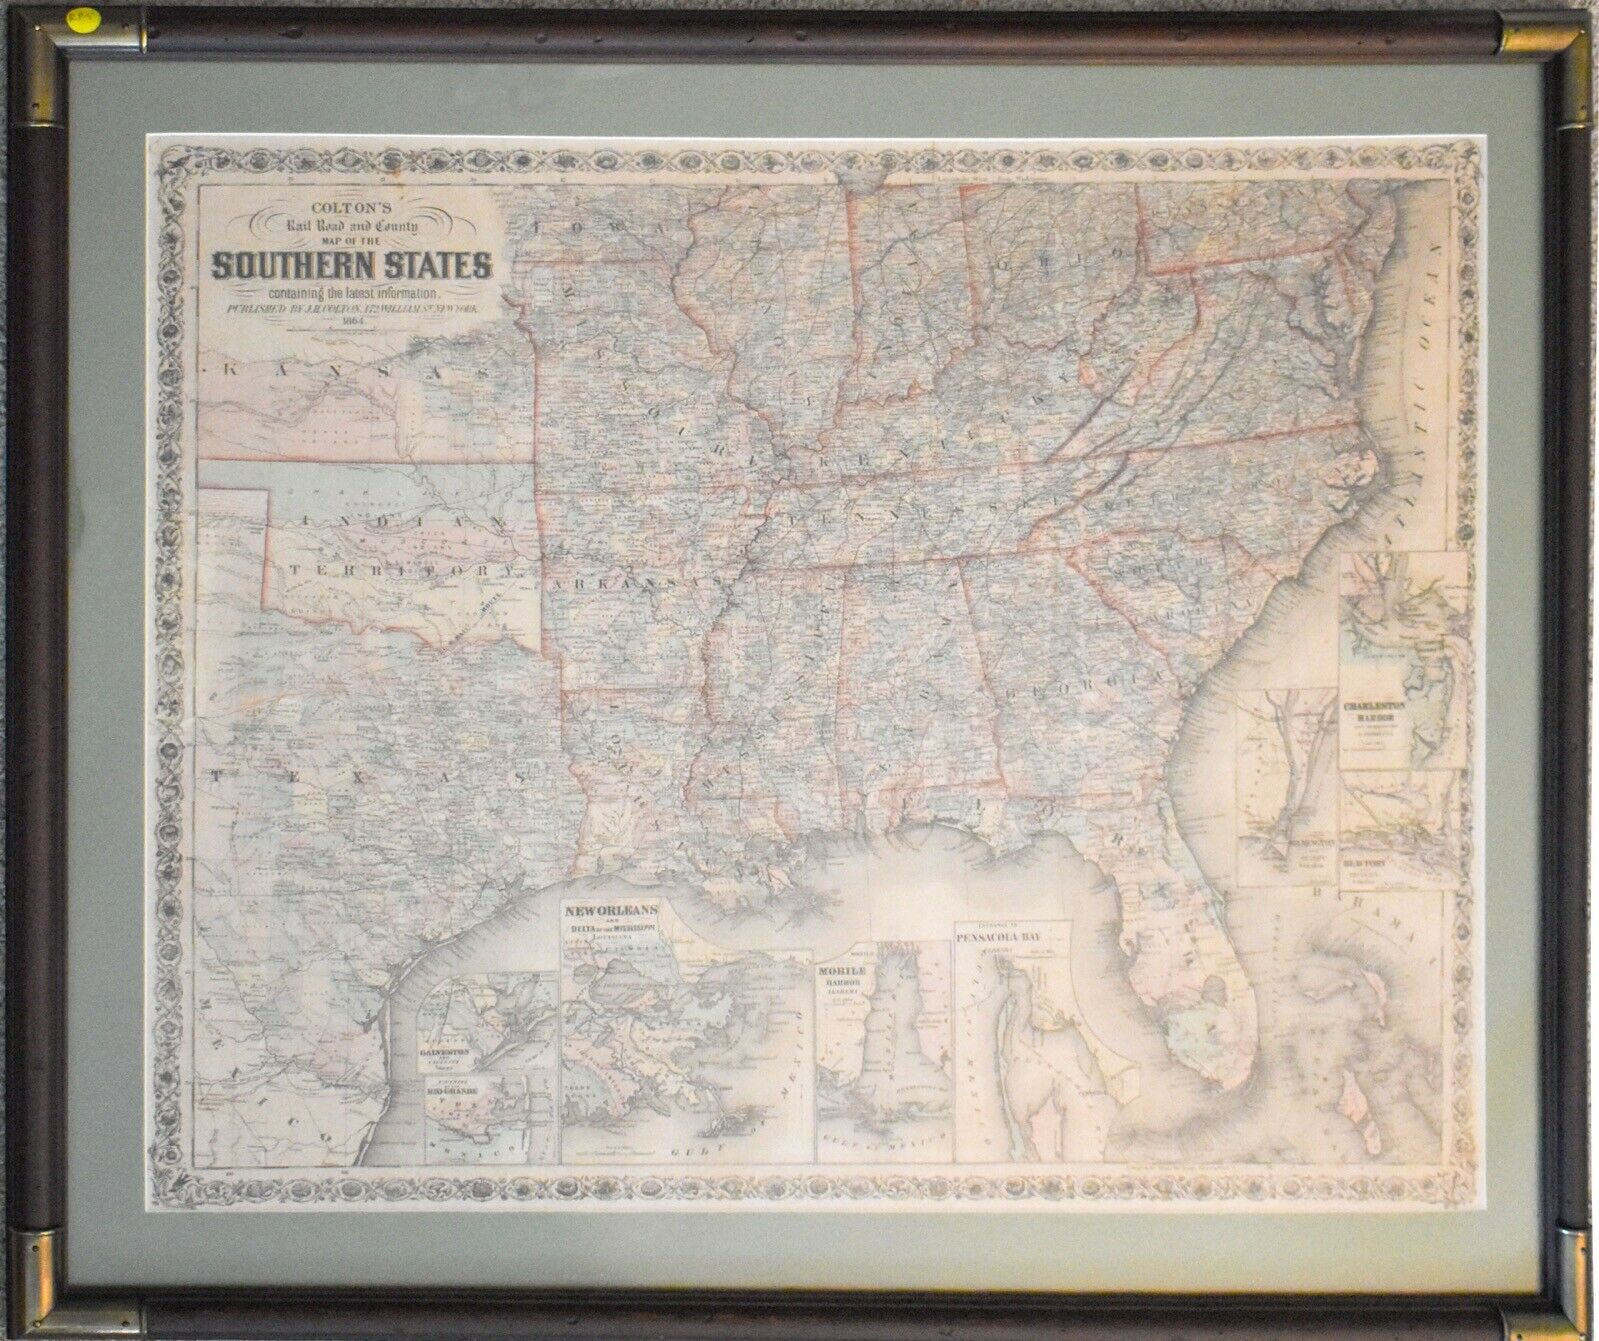 Framed 1864 Civil War Era Colton’s Map Of The Southern States Rp5